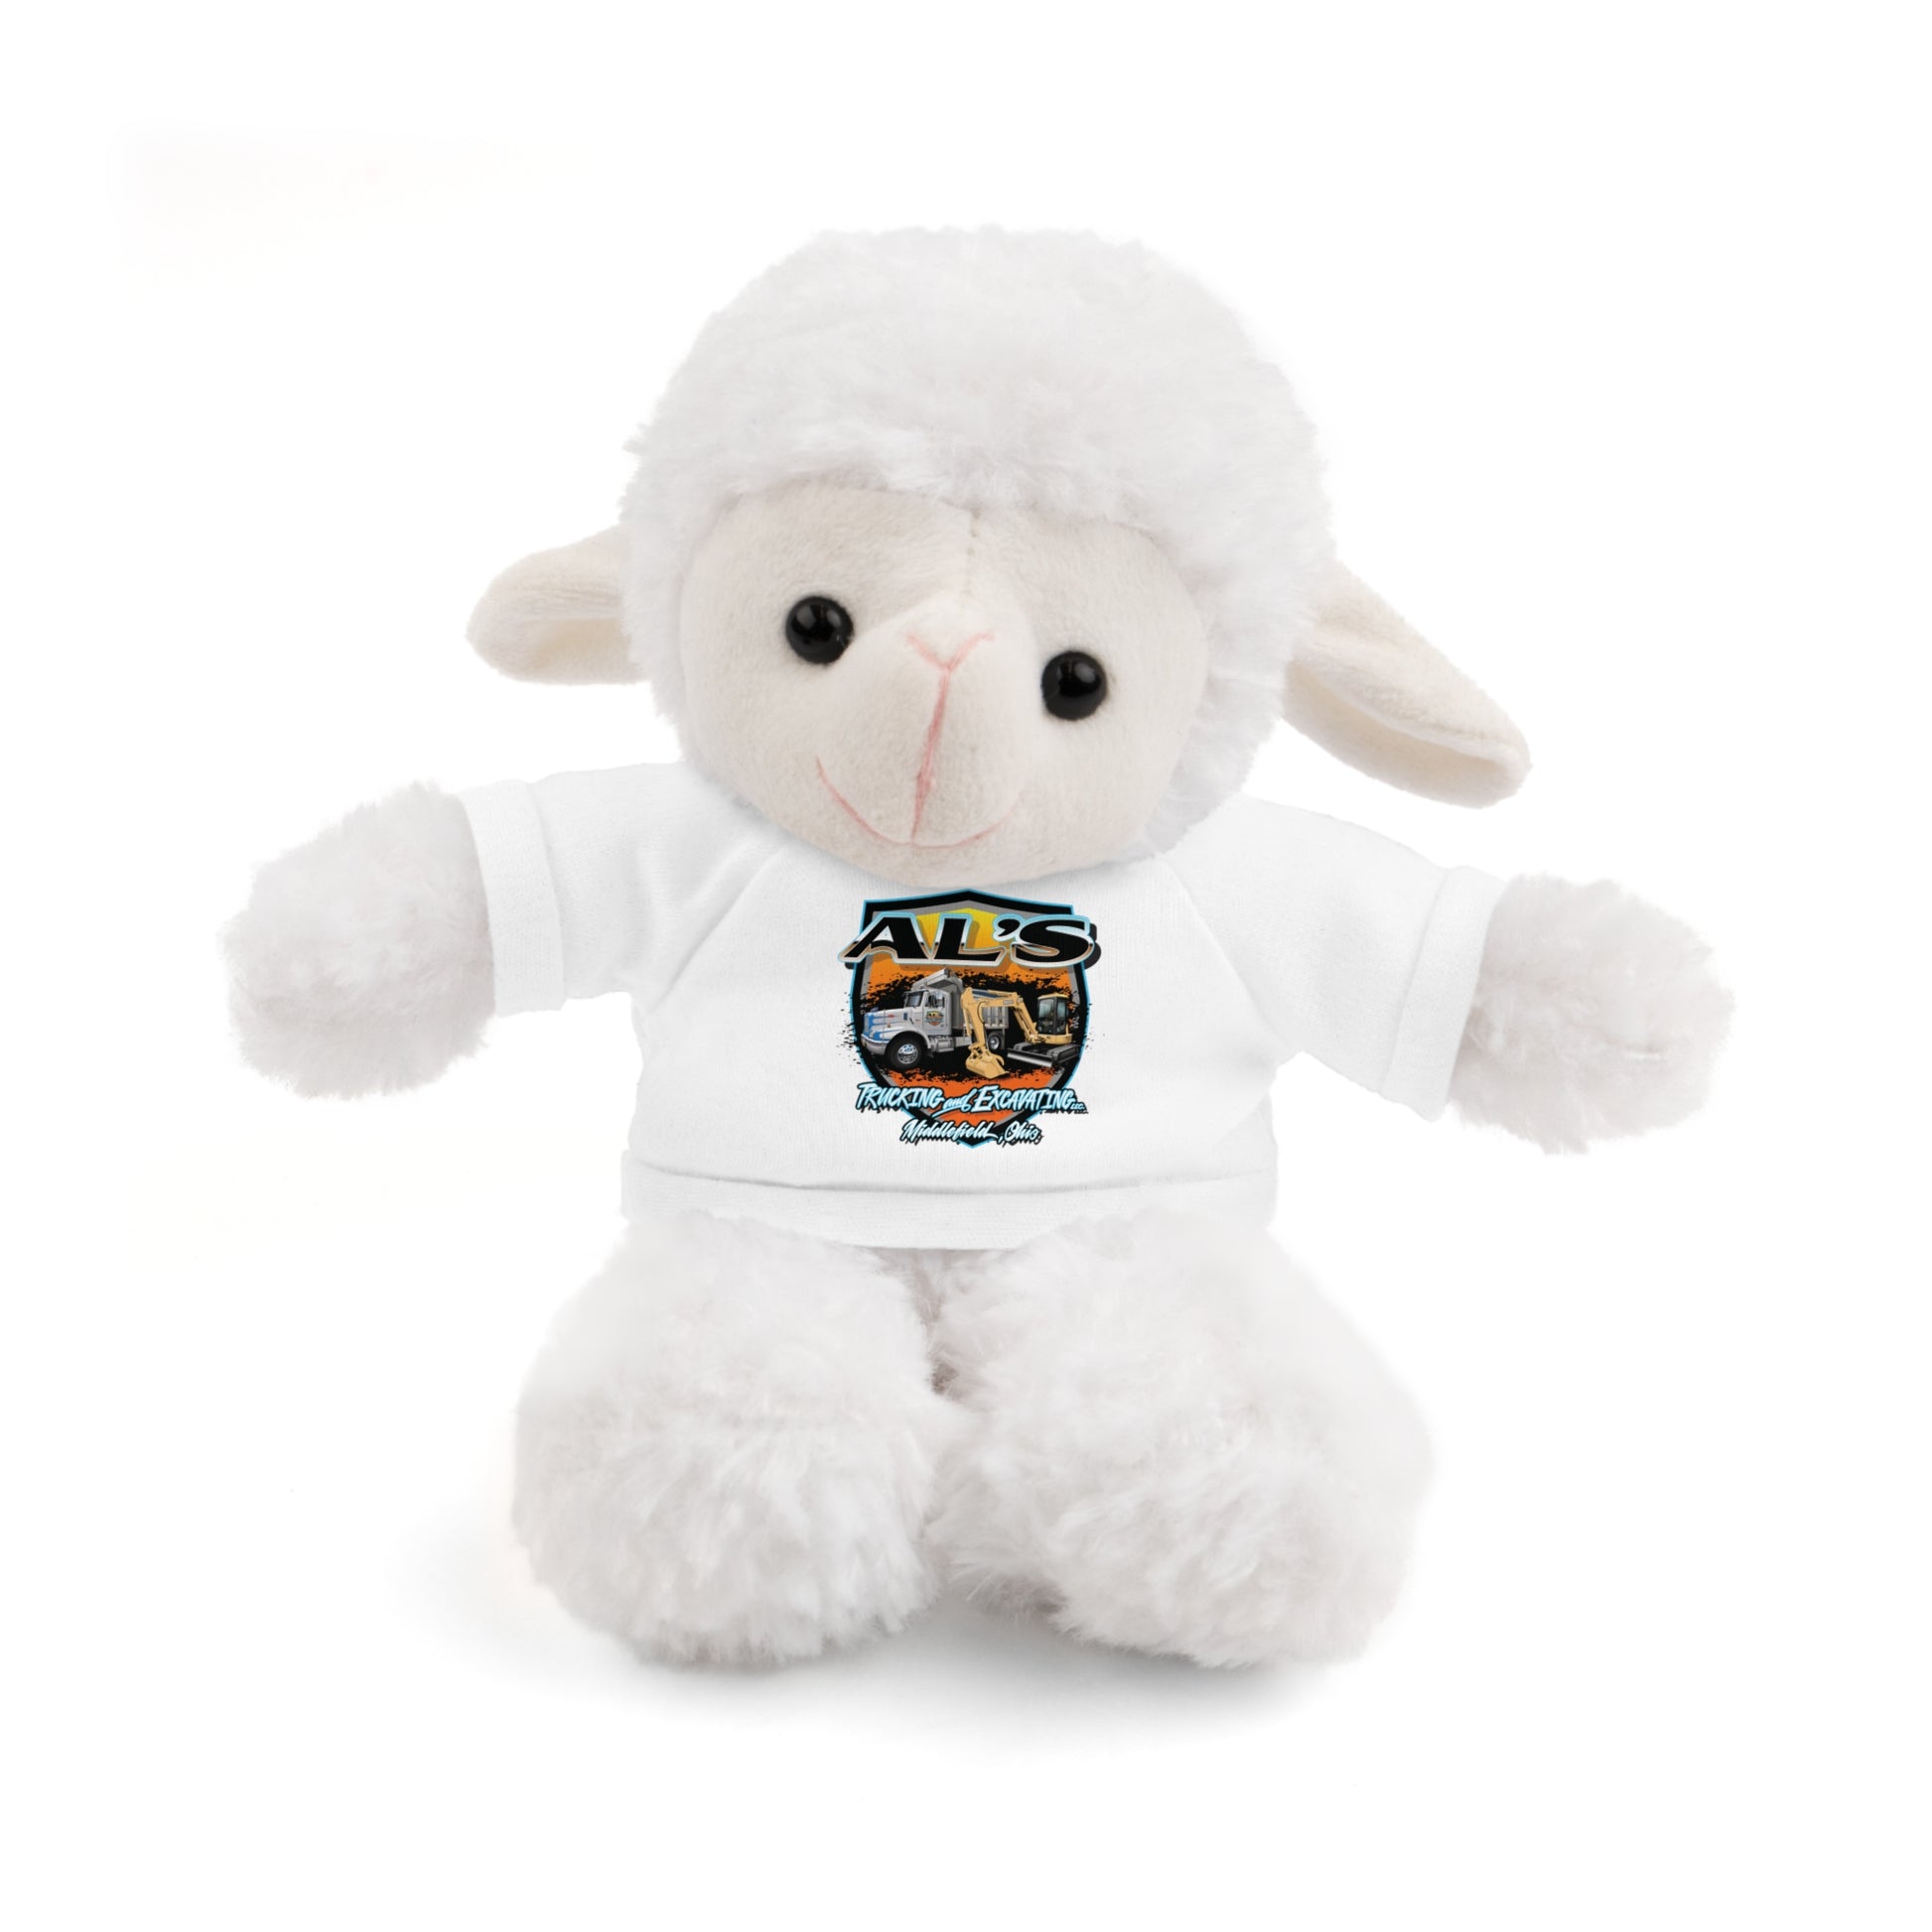 Al's Trucking and Excavating - Stuffed Animals with Tee - OCDandApparel